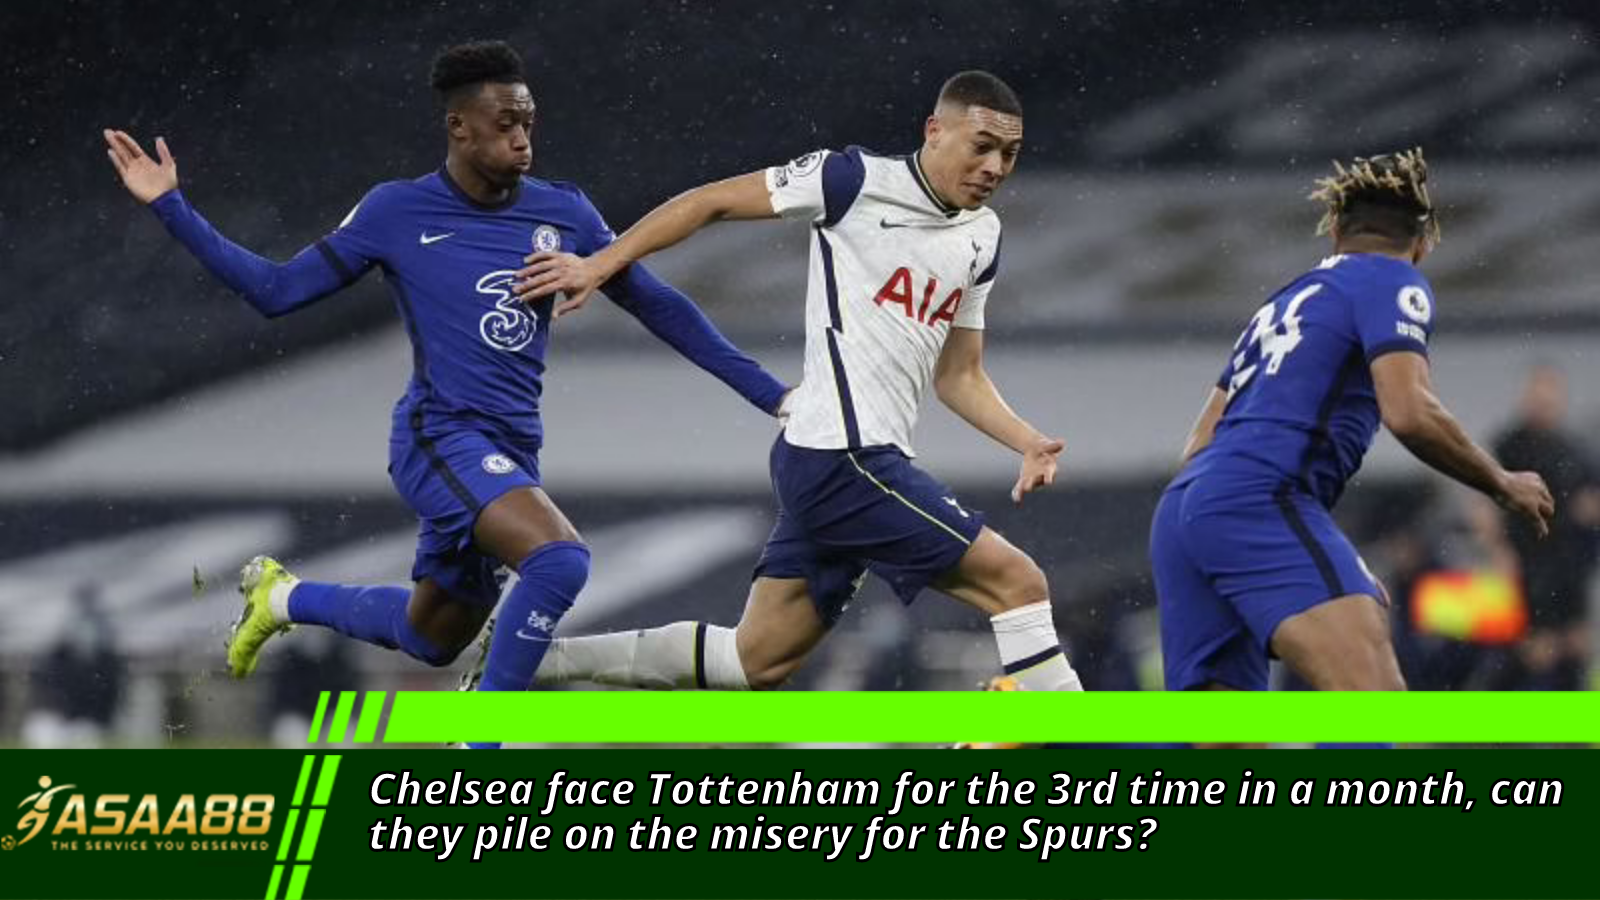 Chelsea face Tottenham for the 3rd time in a month, can they pile on the misery for the Spurs?